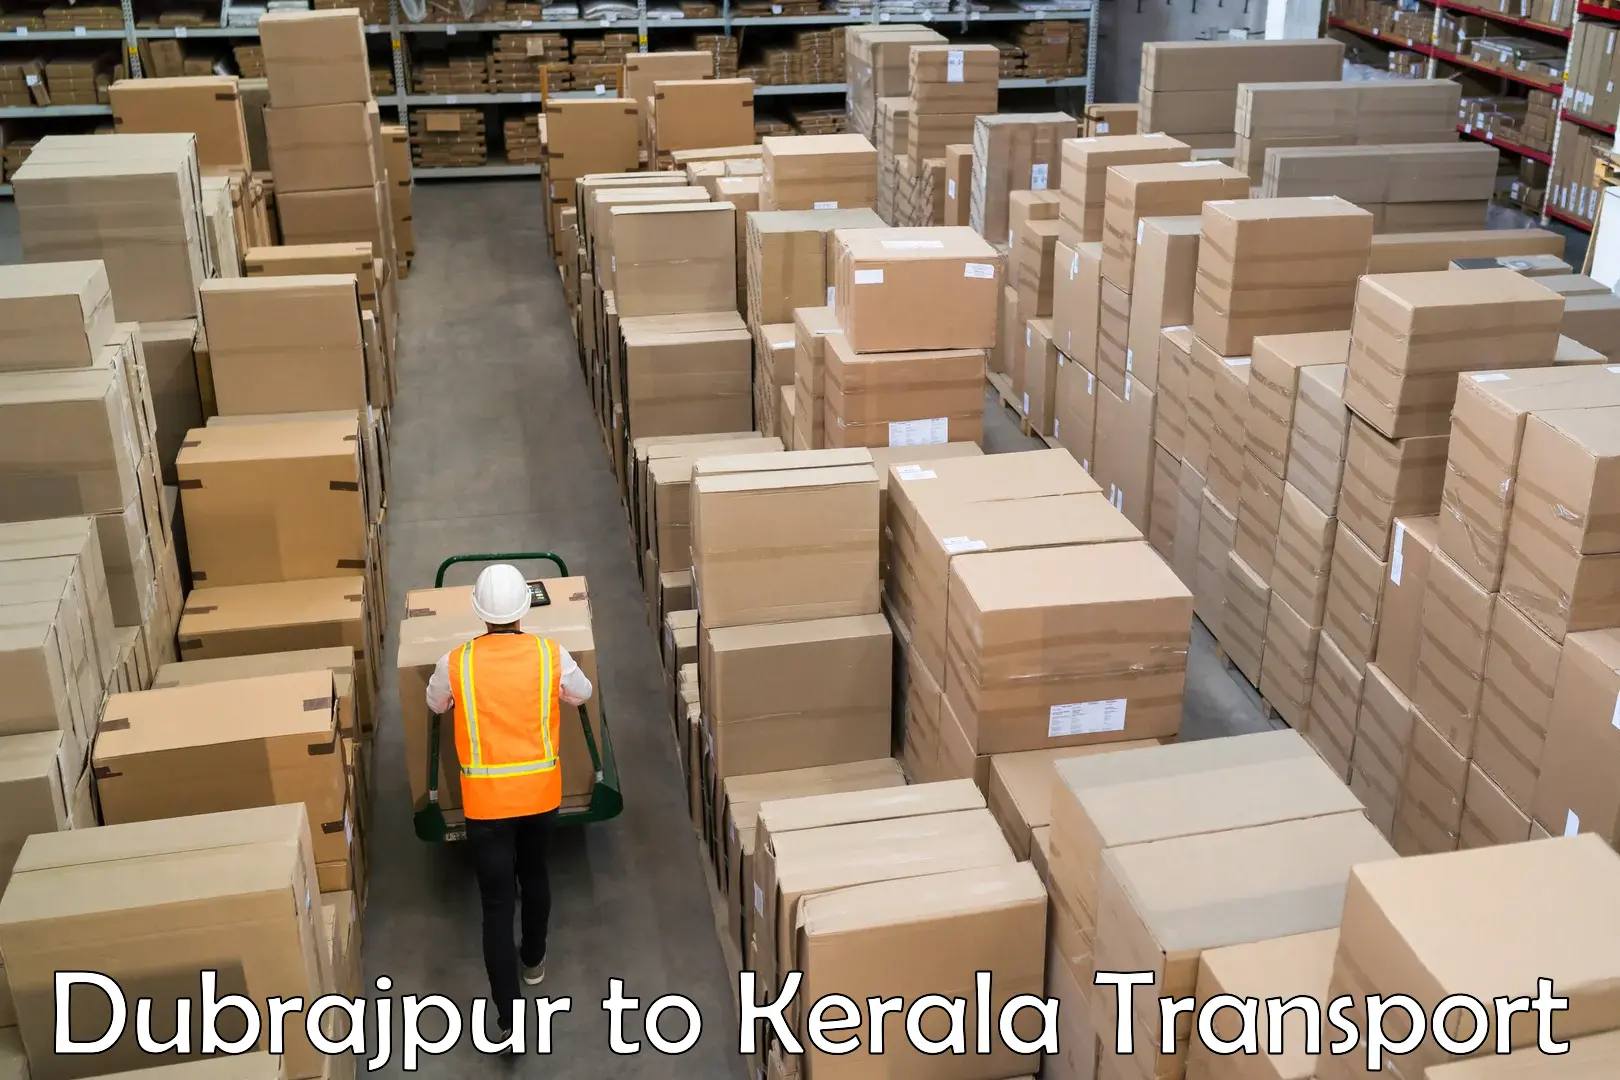 Goods delivery service Dubrajpur to Guruvayur